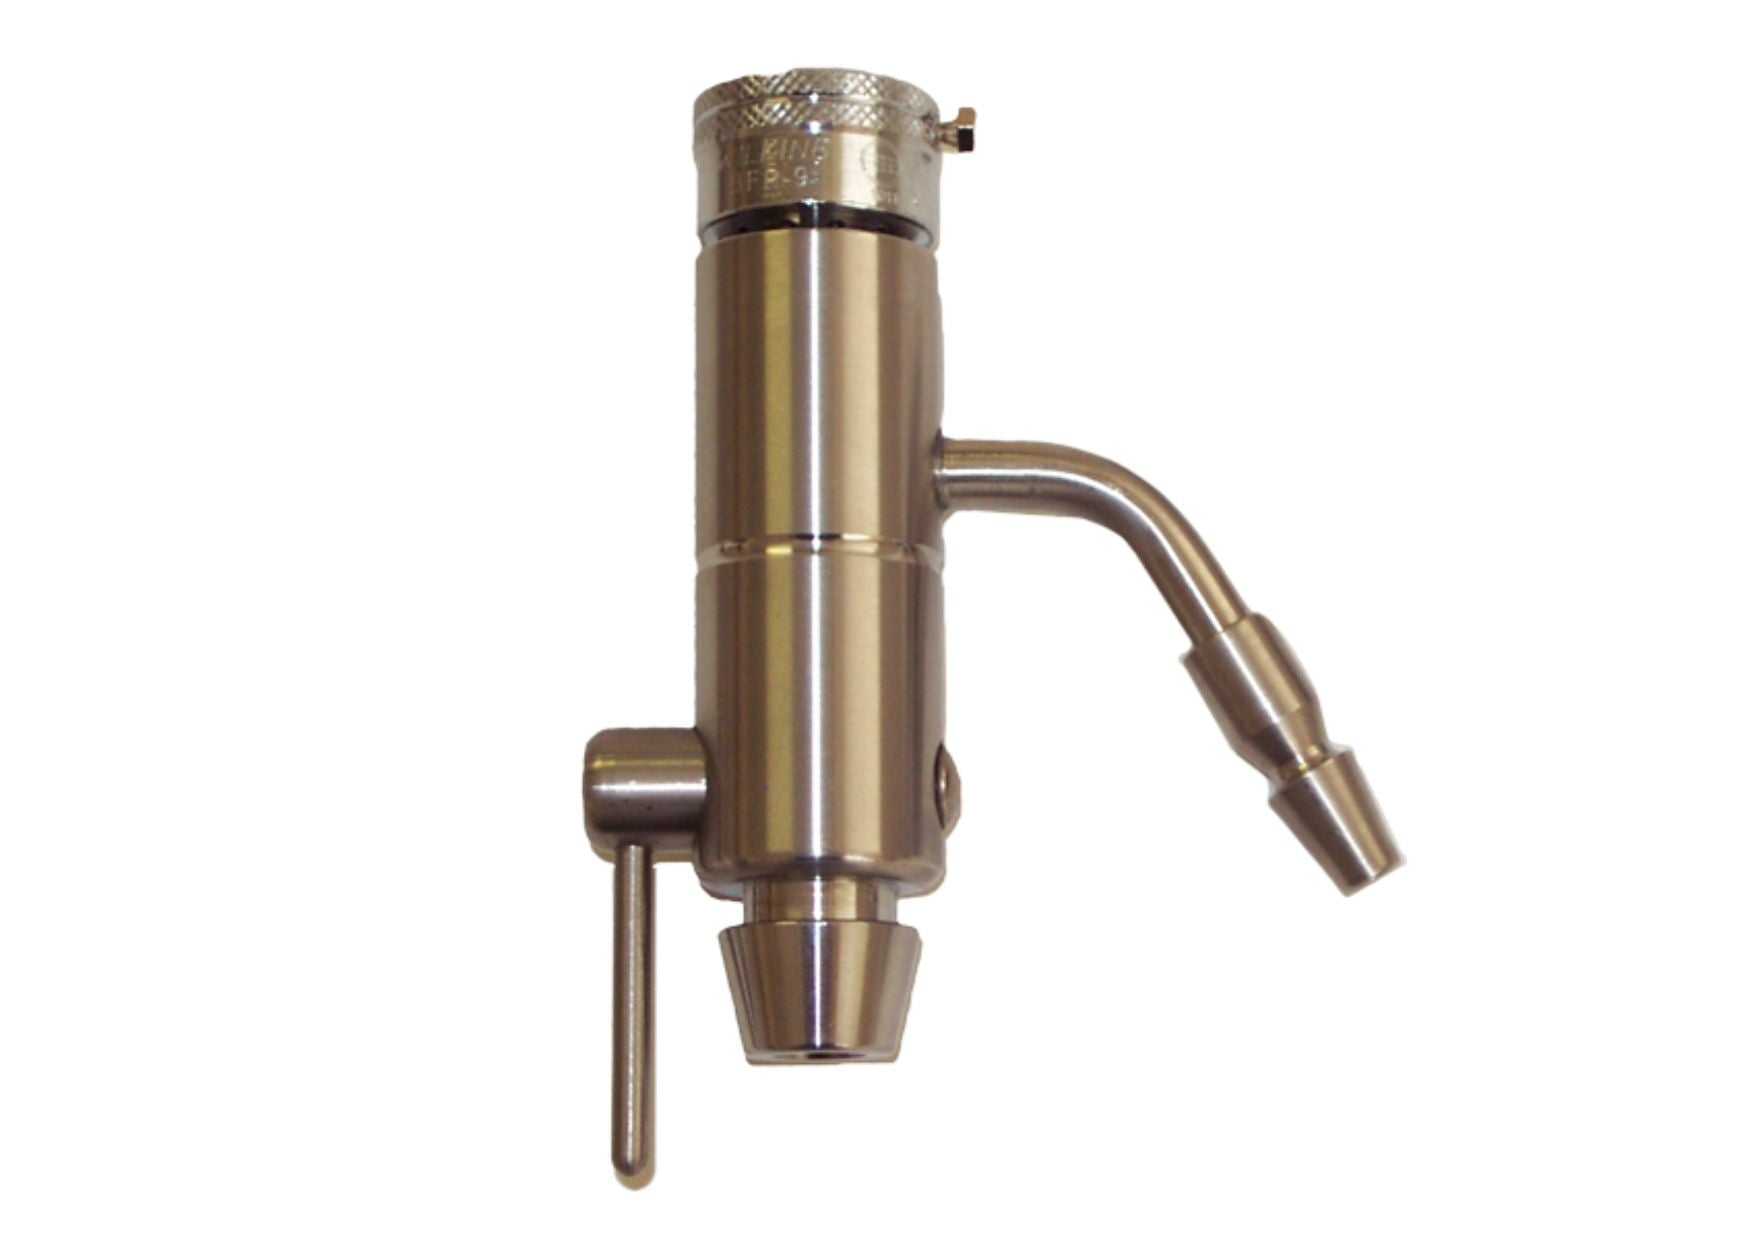 Hydro aspirator, stainless steel, with hose connector